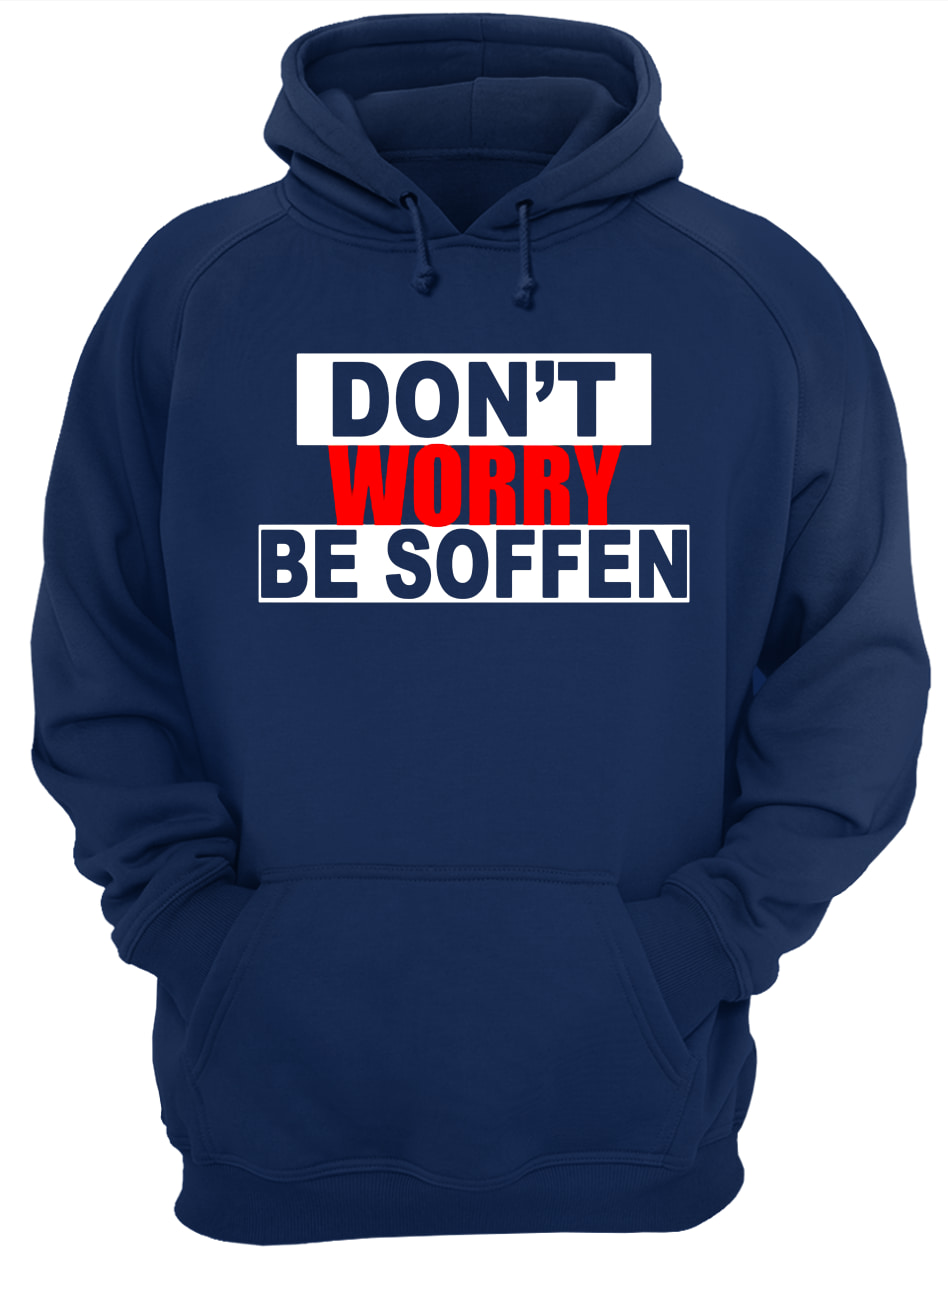 Don't worry be soffen hoodie